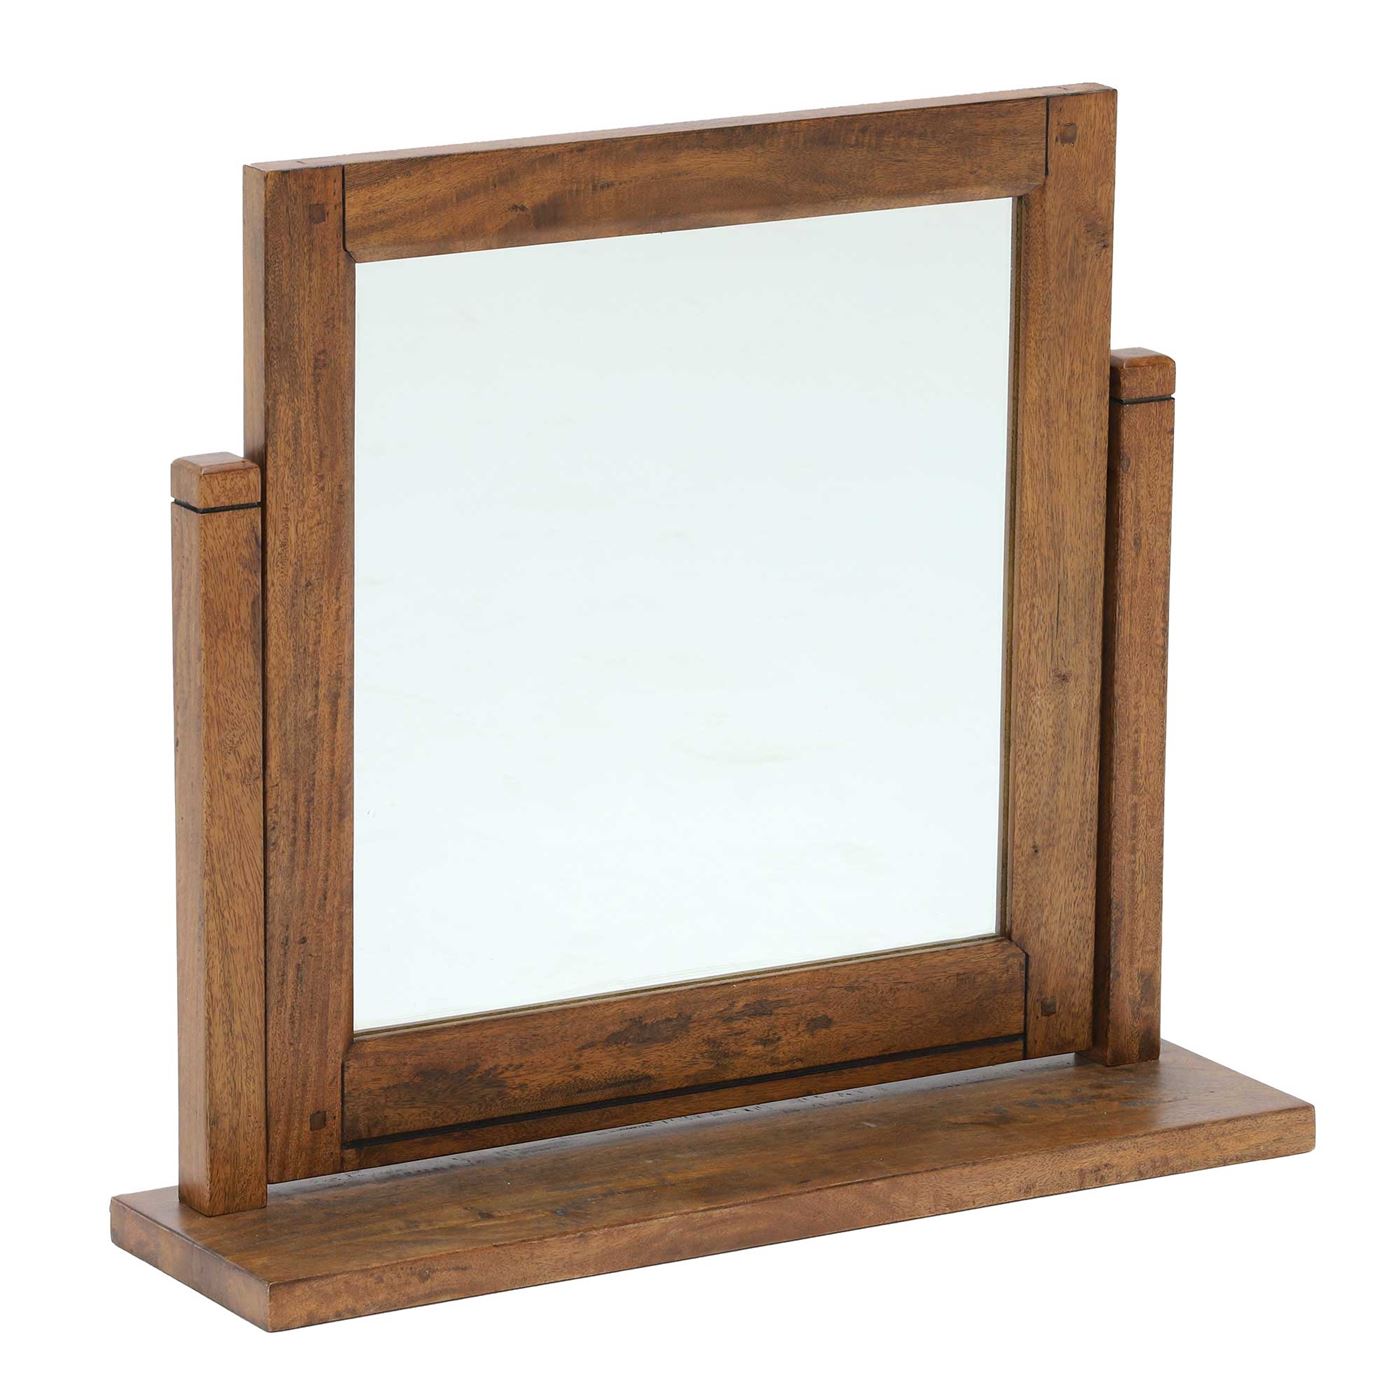 New Frontier Gallery Mirror, Square, Brown | Barker & Stonehouse